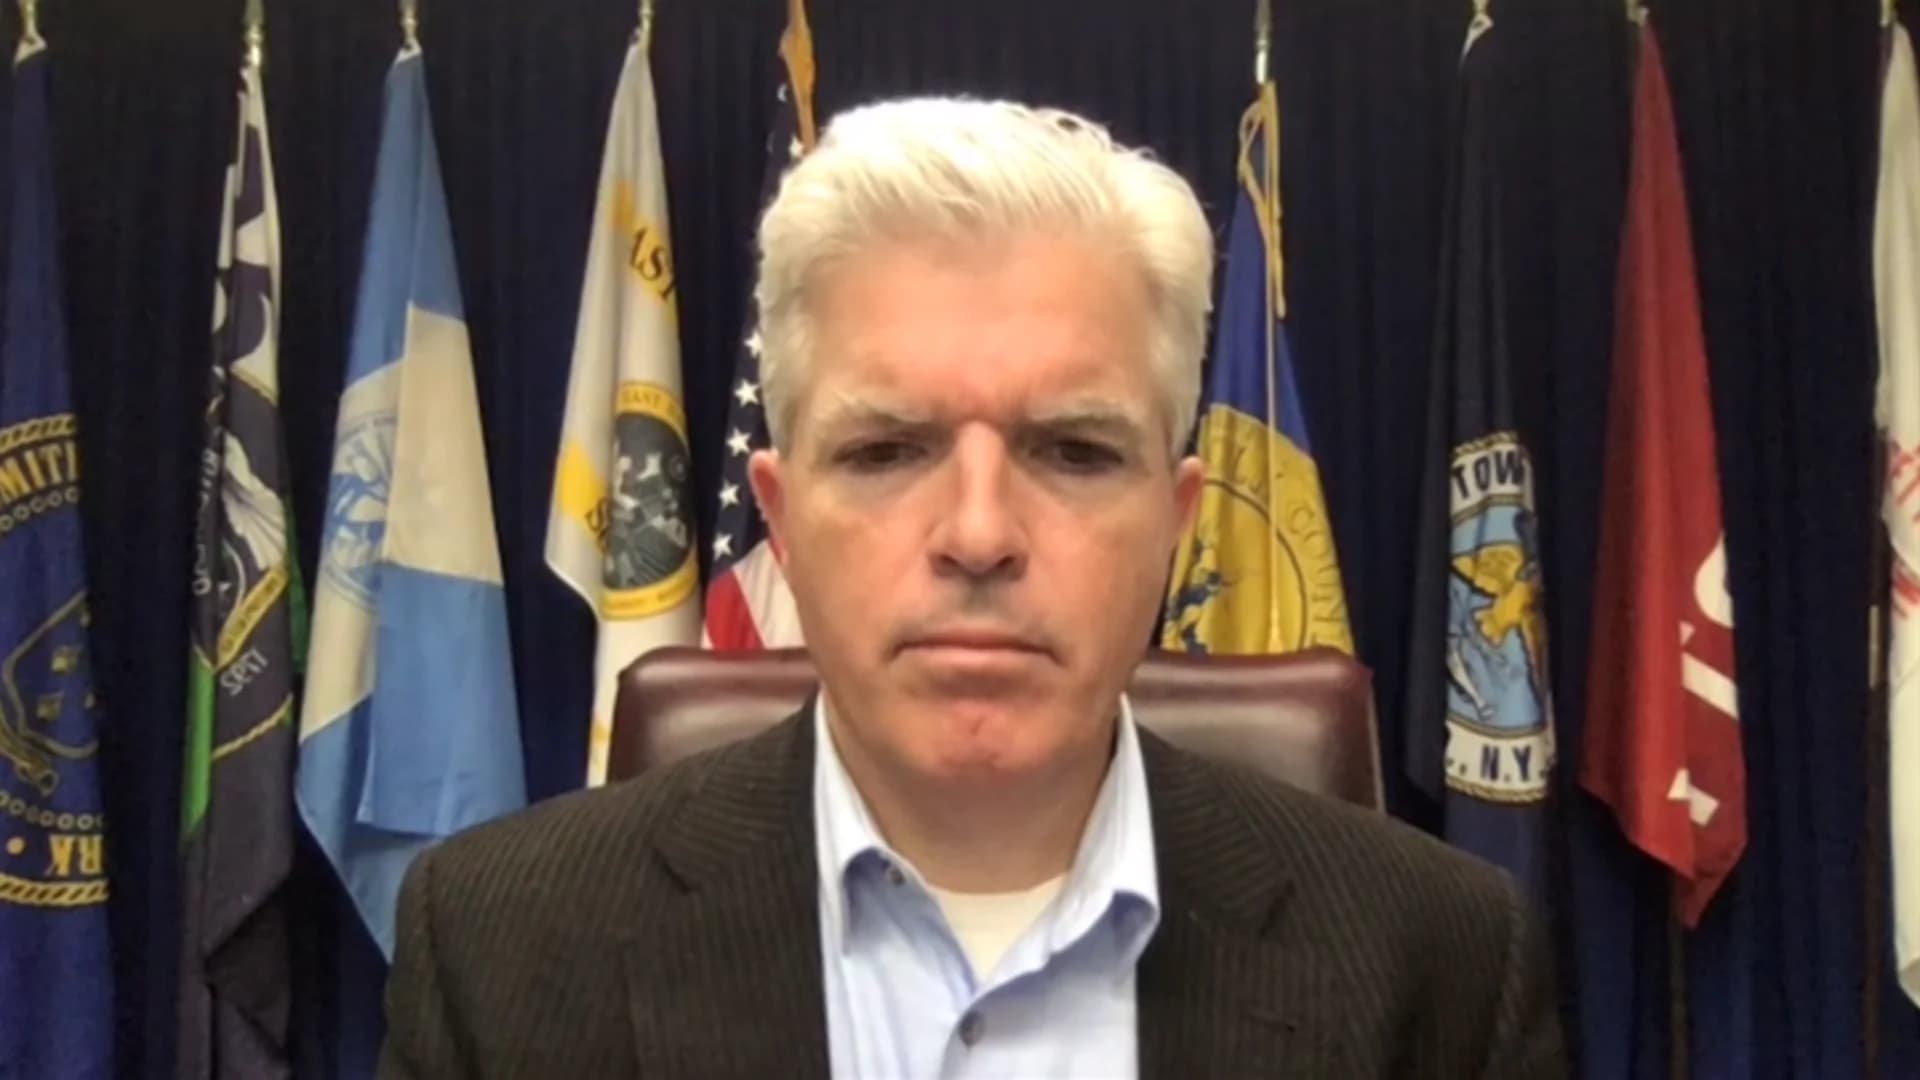 Suffolk COVID-19 hospitalizations dip again, Bellone details tax relief efforts